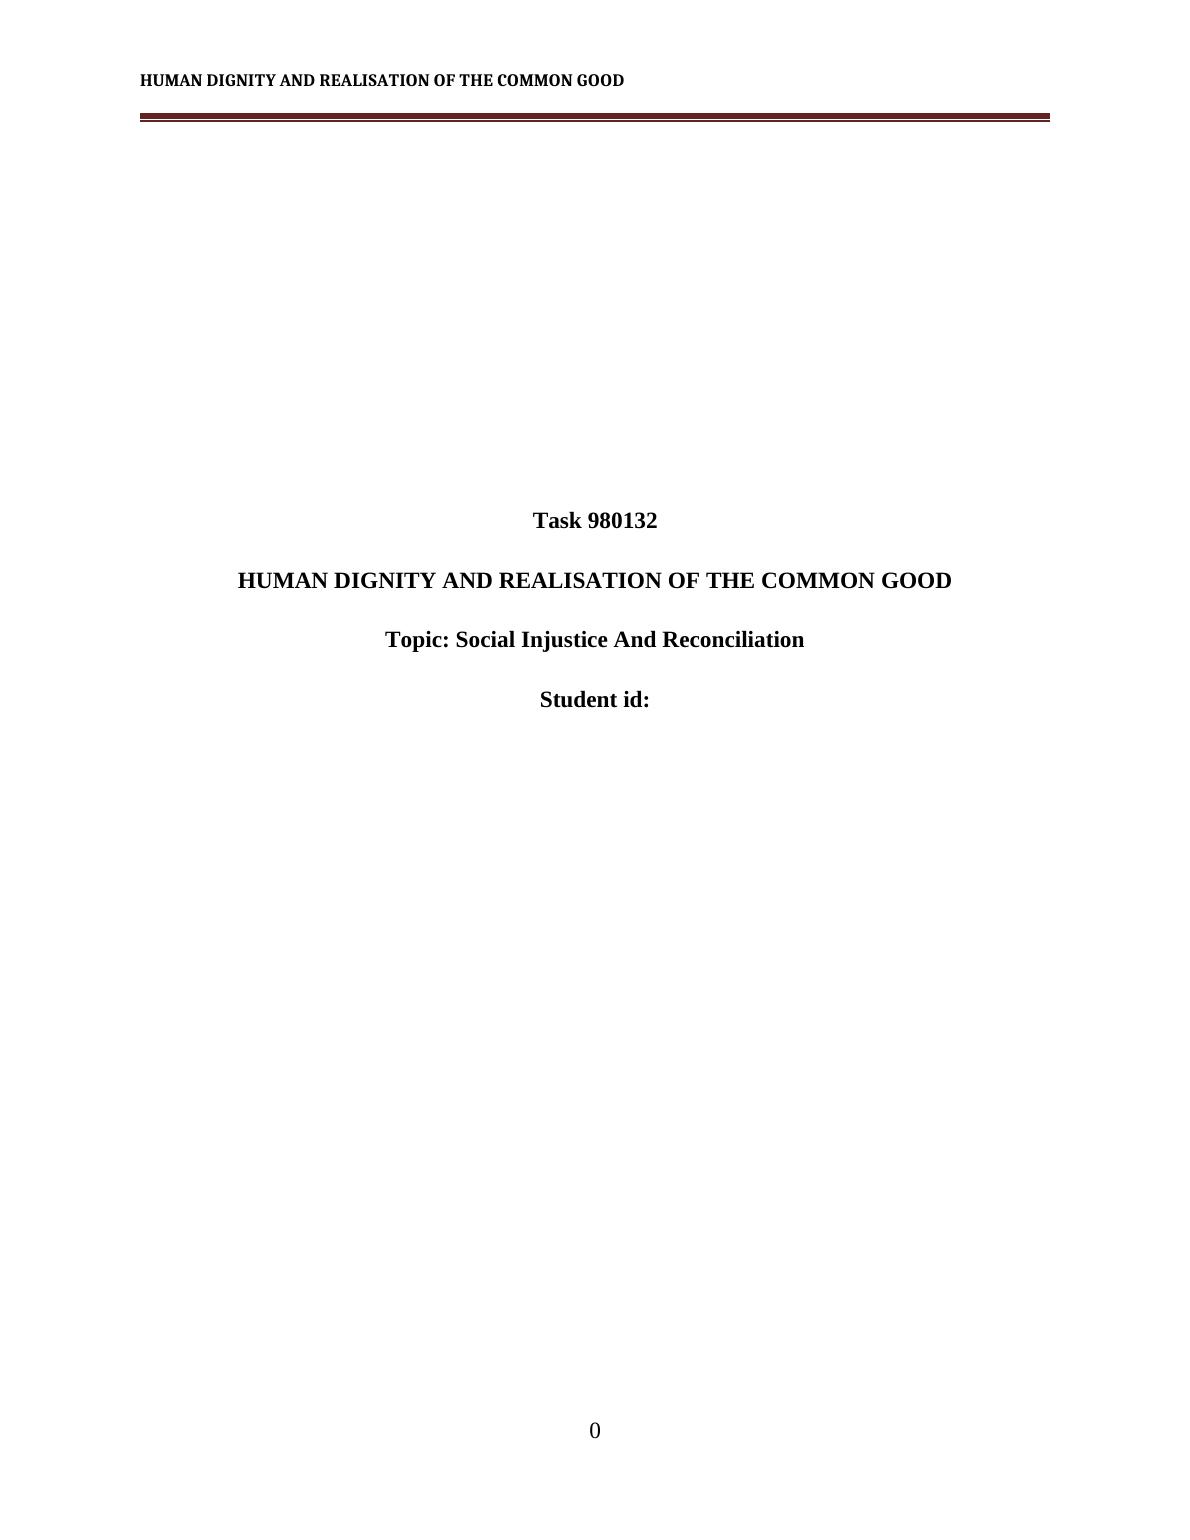 Human Dignity and Realisation of the Common Good_1